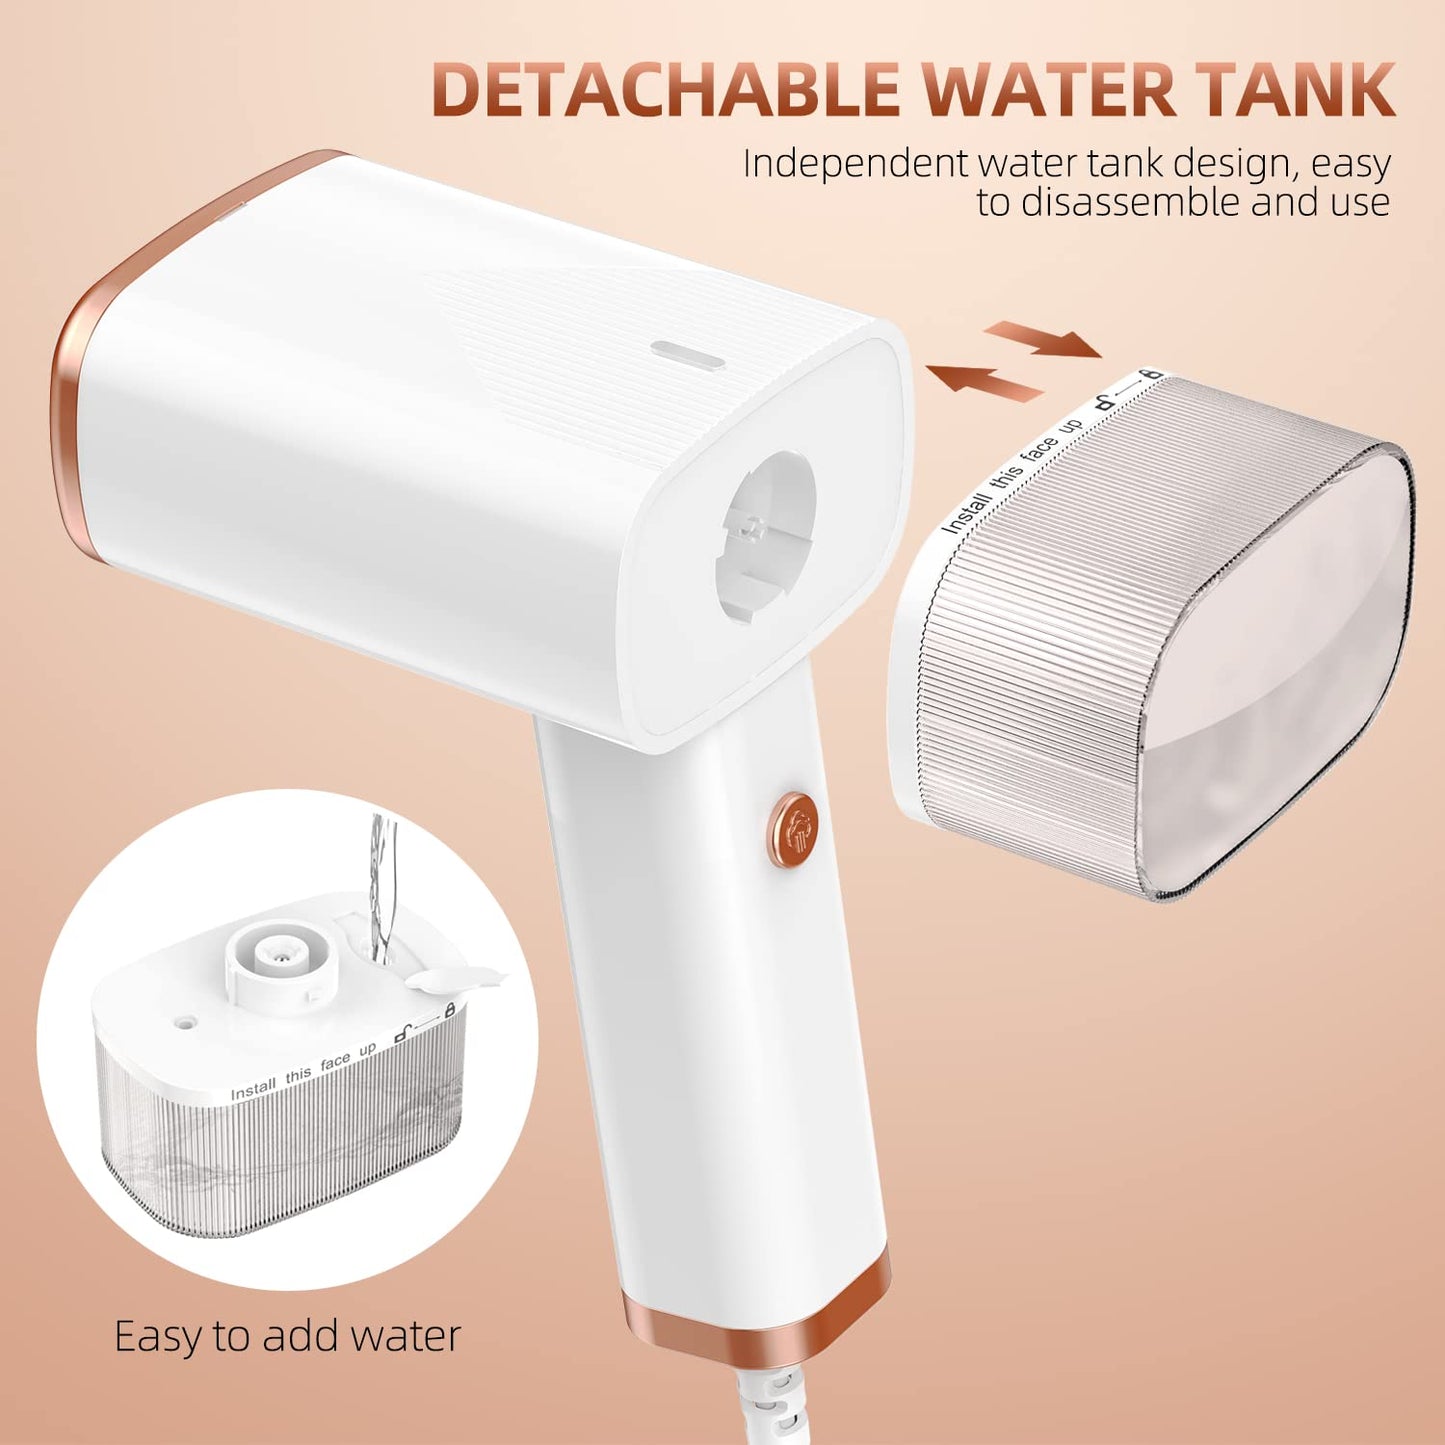 Portable Steamer for Clothes -Fast Heat-up, 1200W, 120ml Water Tank - Portable Wrinkle Remover for Home & Travel (120V Only, Not for Europe)